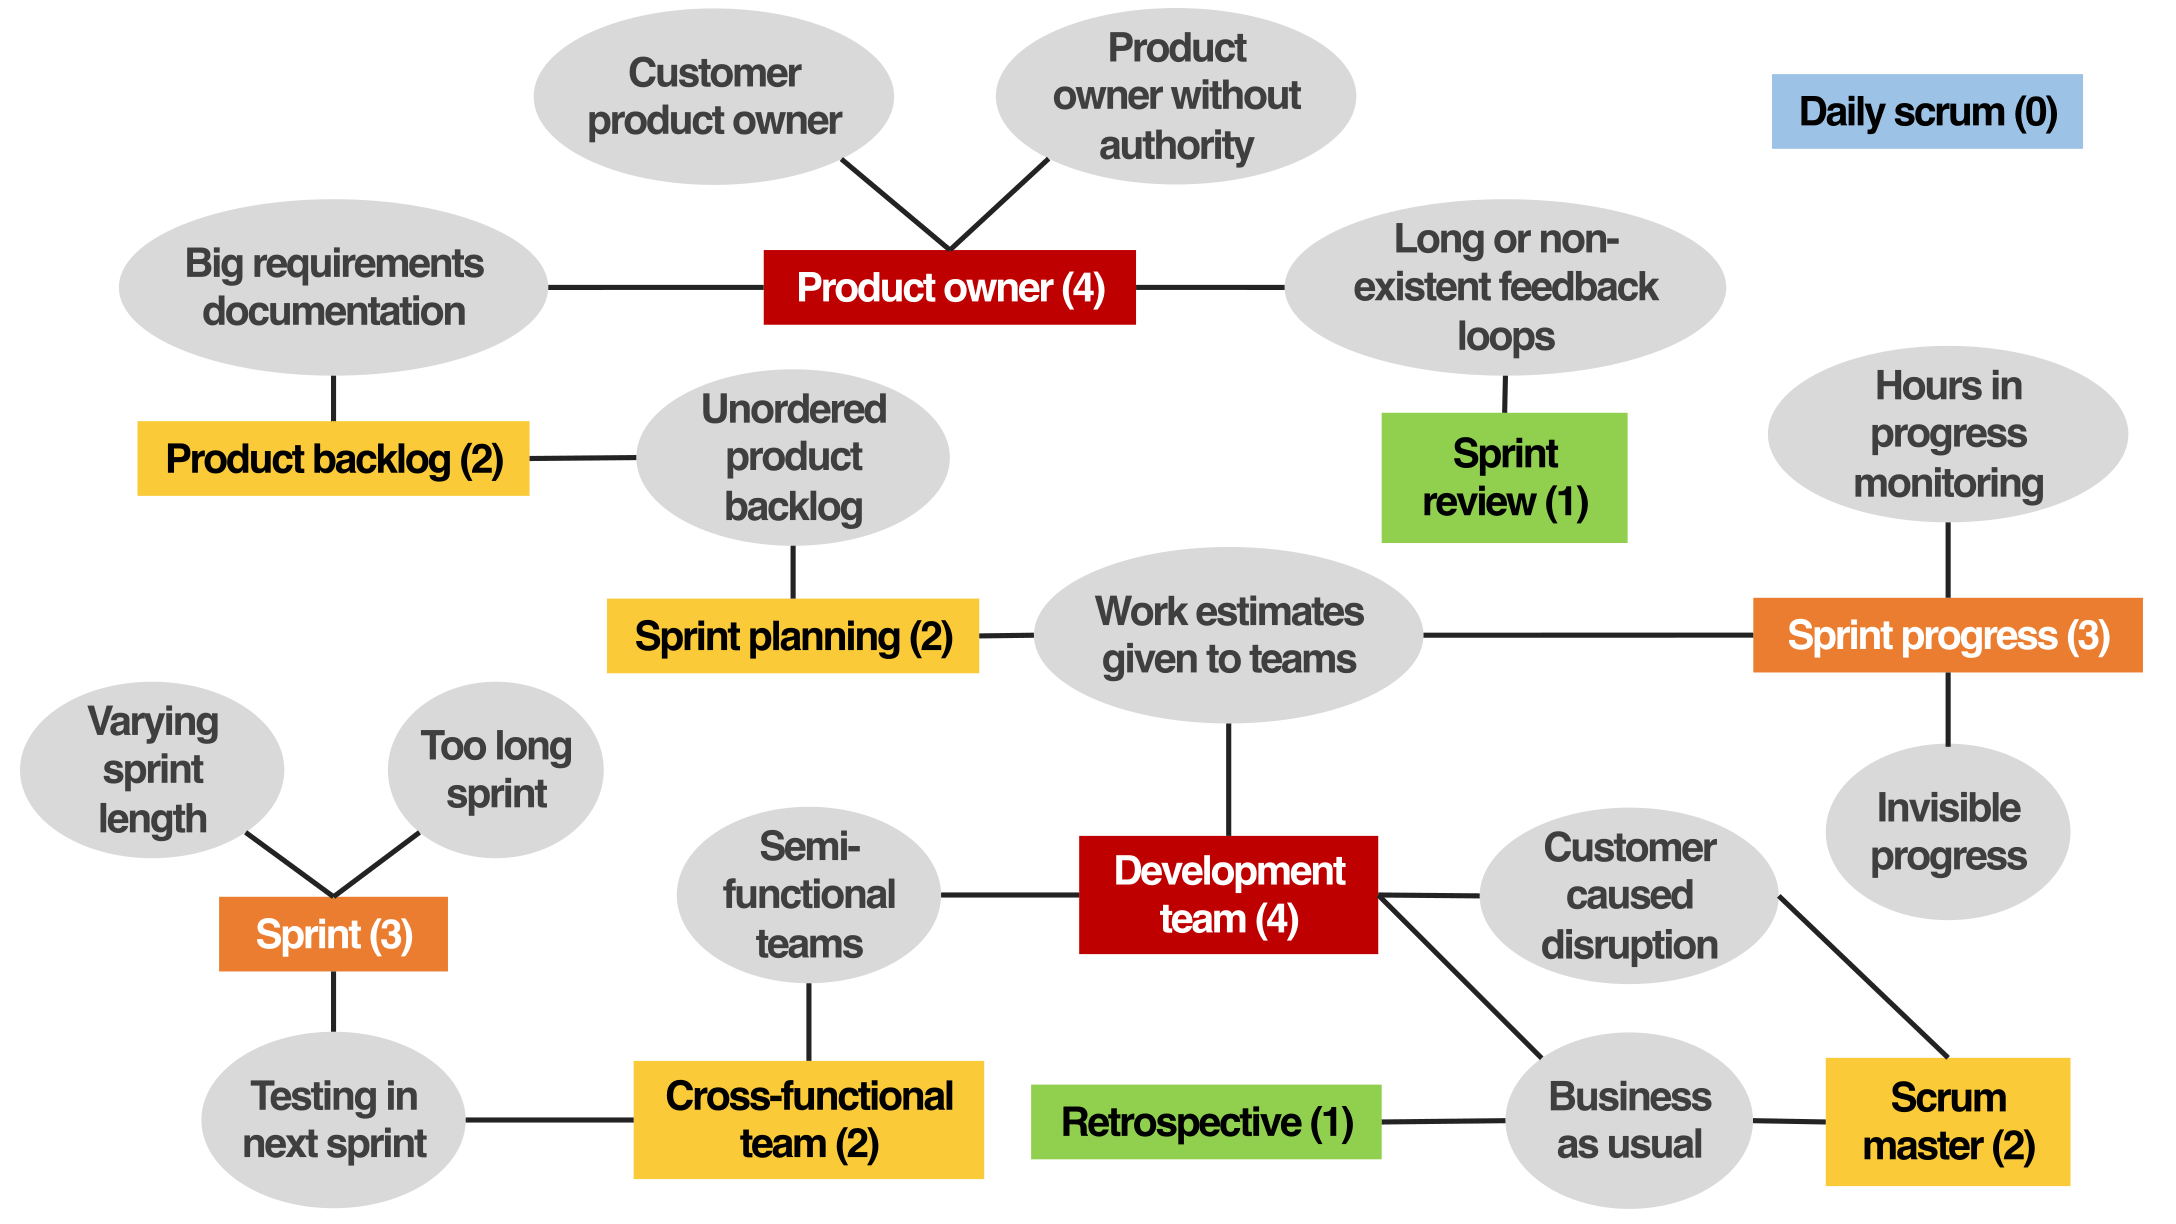 Graph that shows relationships between Scrum anti-patterns and core concepts within Scrum